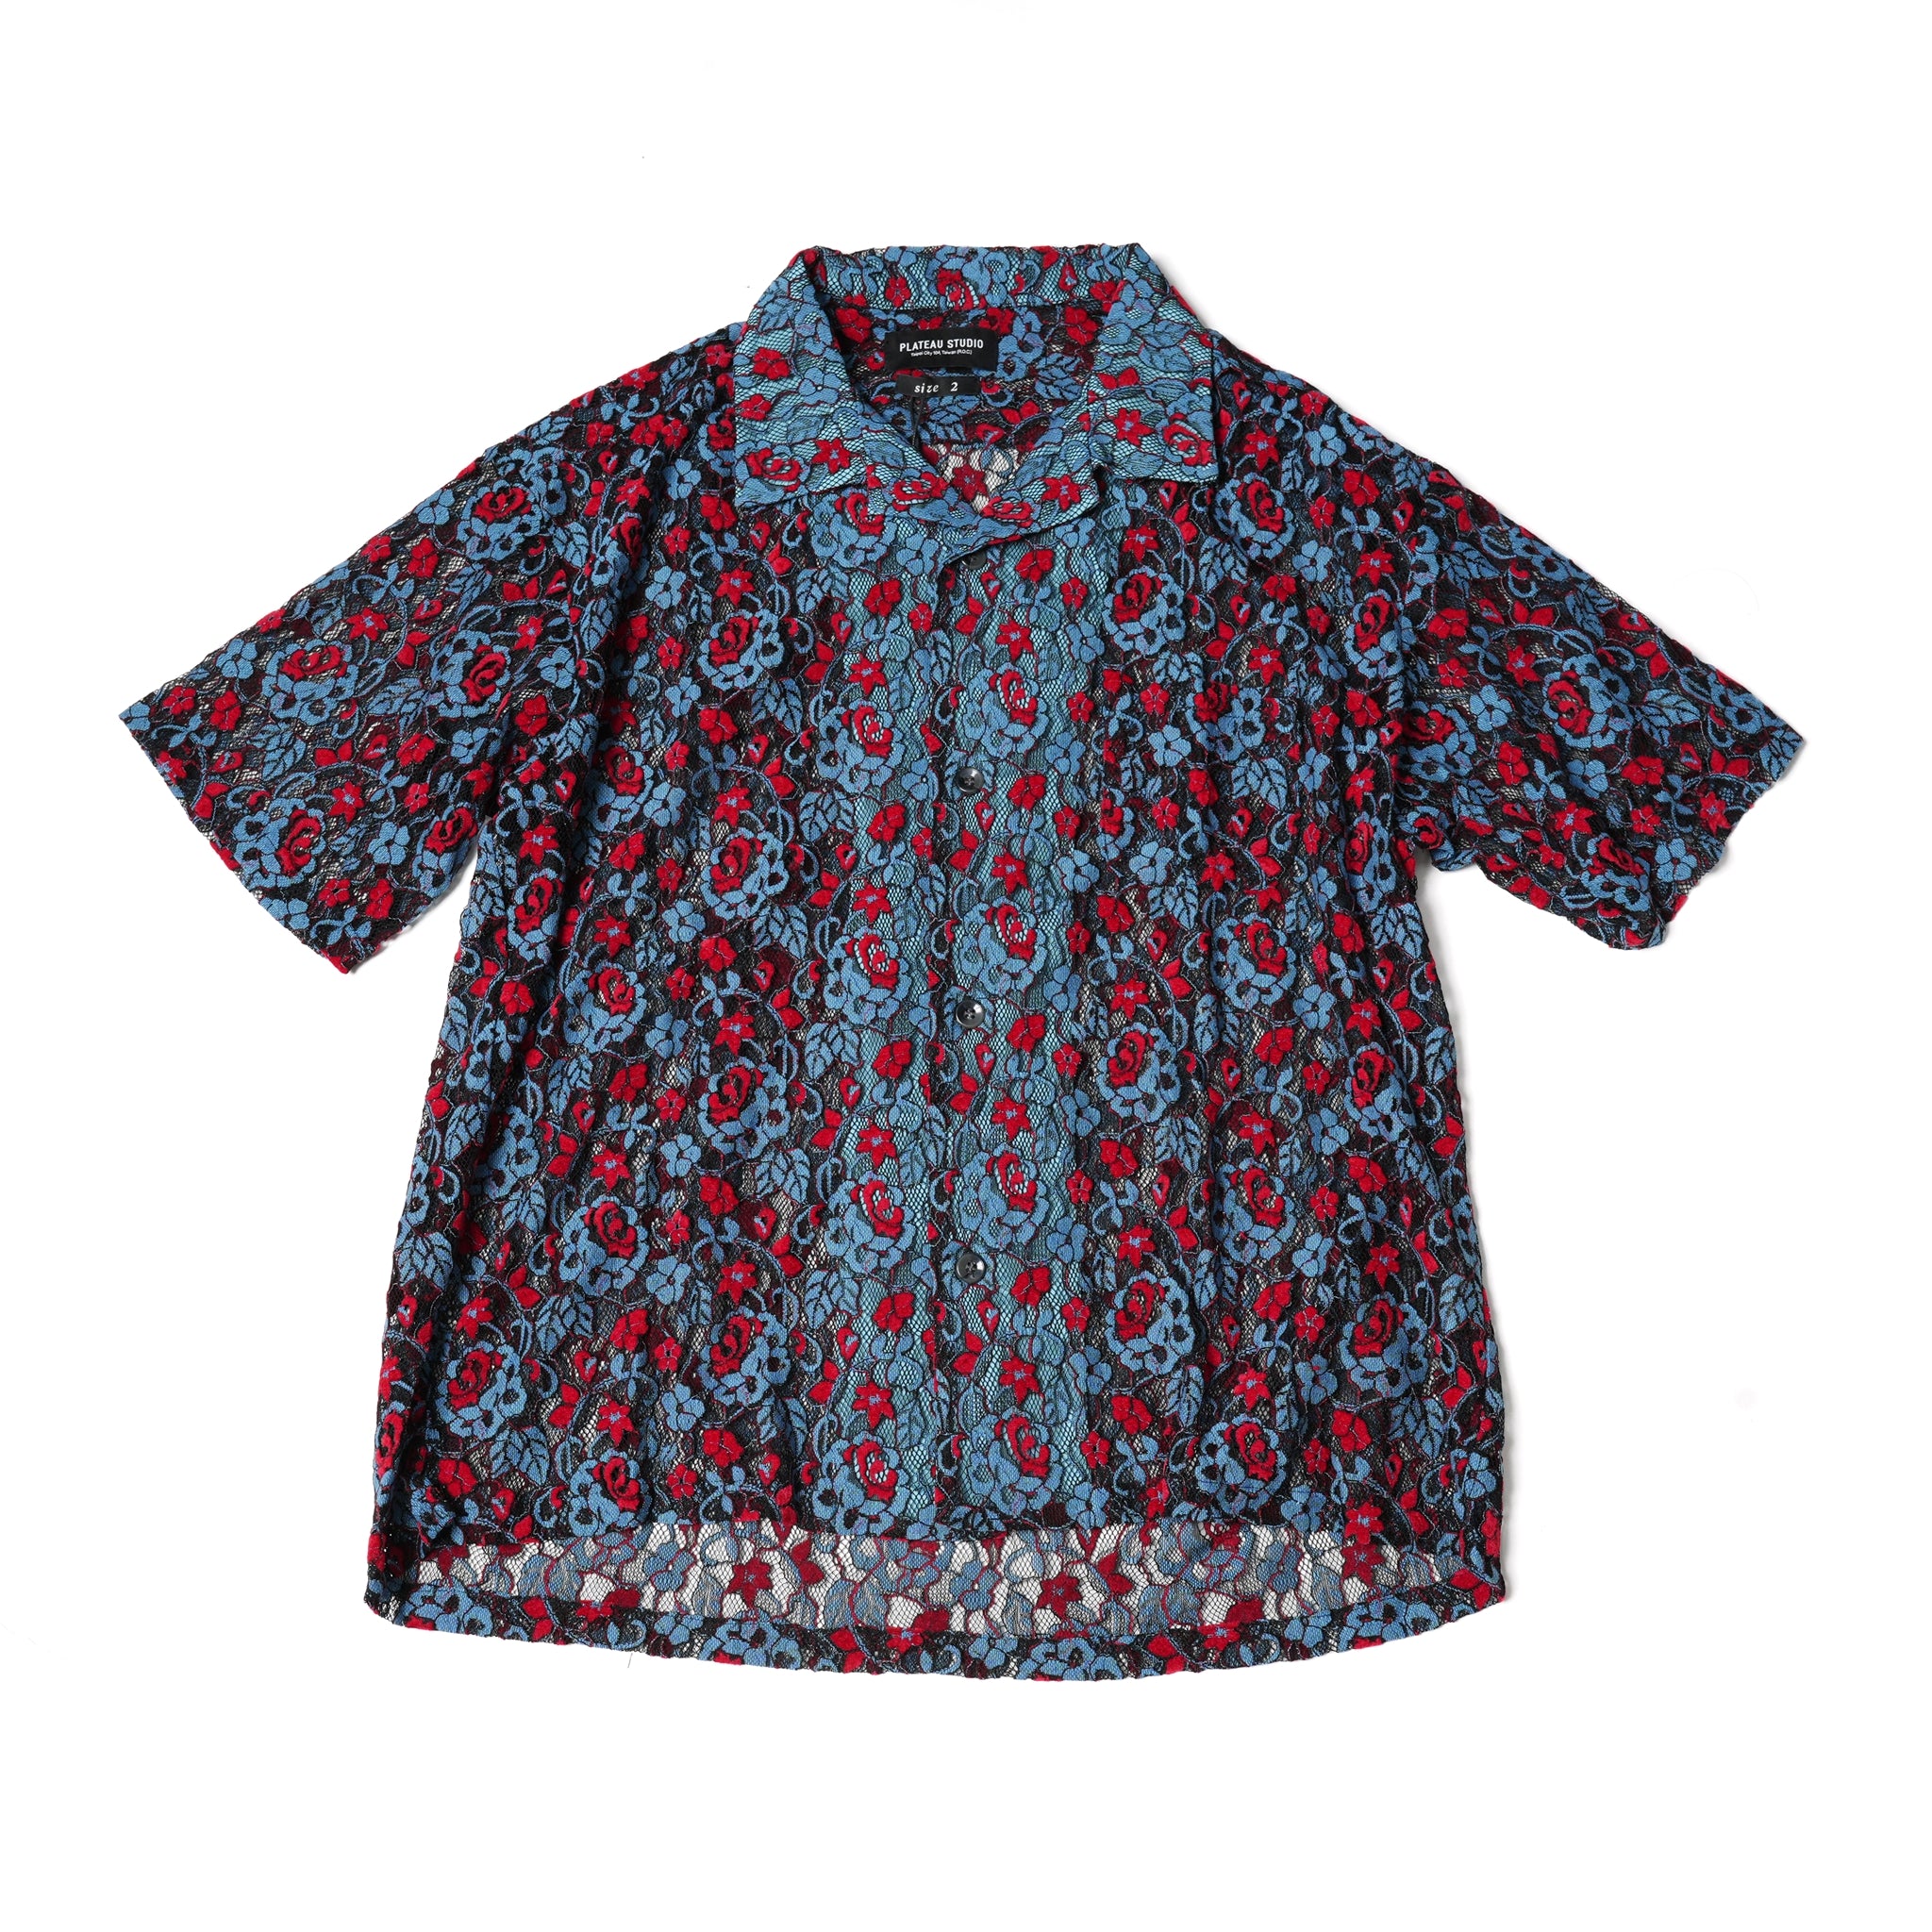 No:ps23t01 | Name:Neon Lace Shirt | Color:Blue&Red【PLATEAU STUDIO_プラトー スタジオ】